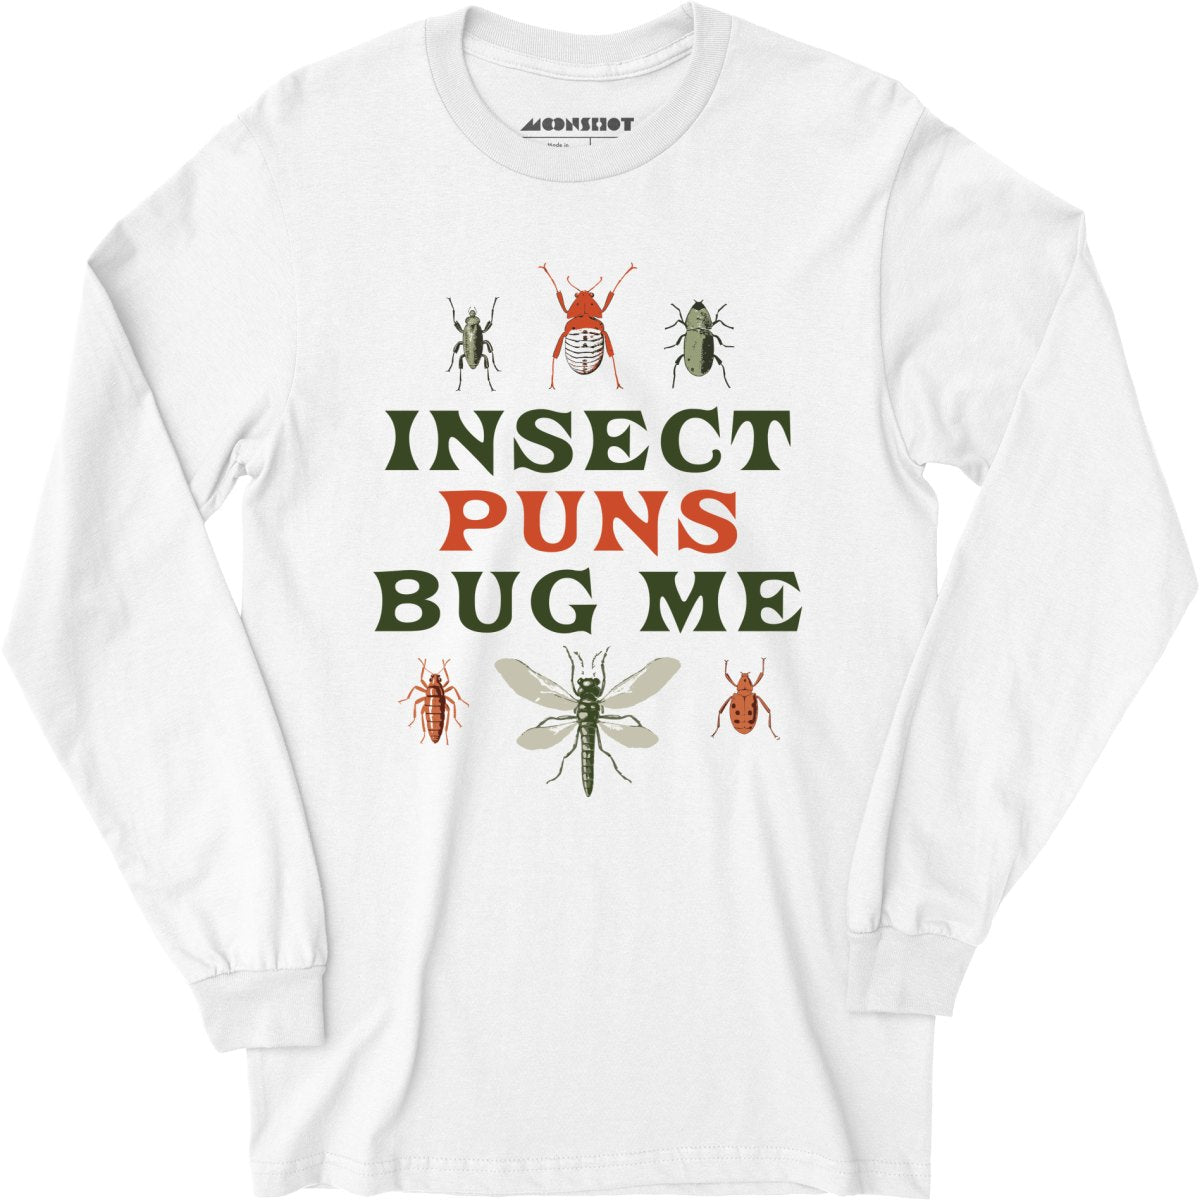 Insect Puns Bug Me - Long Sleeve T-Shirt